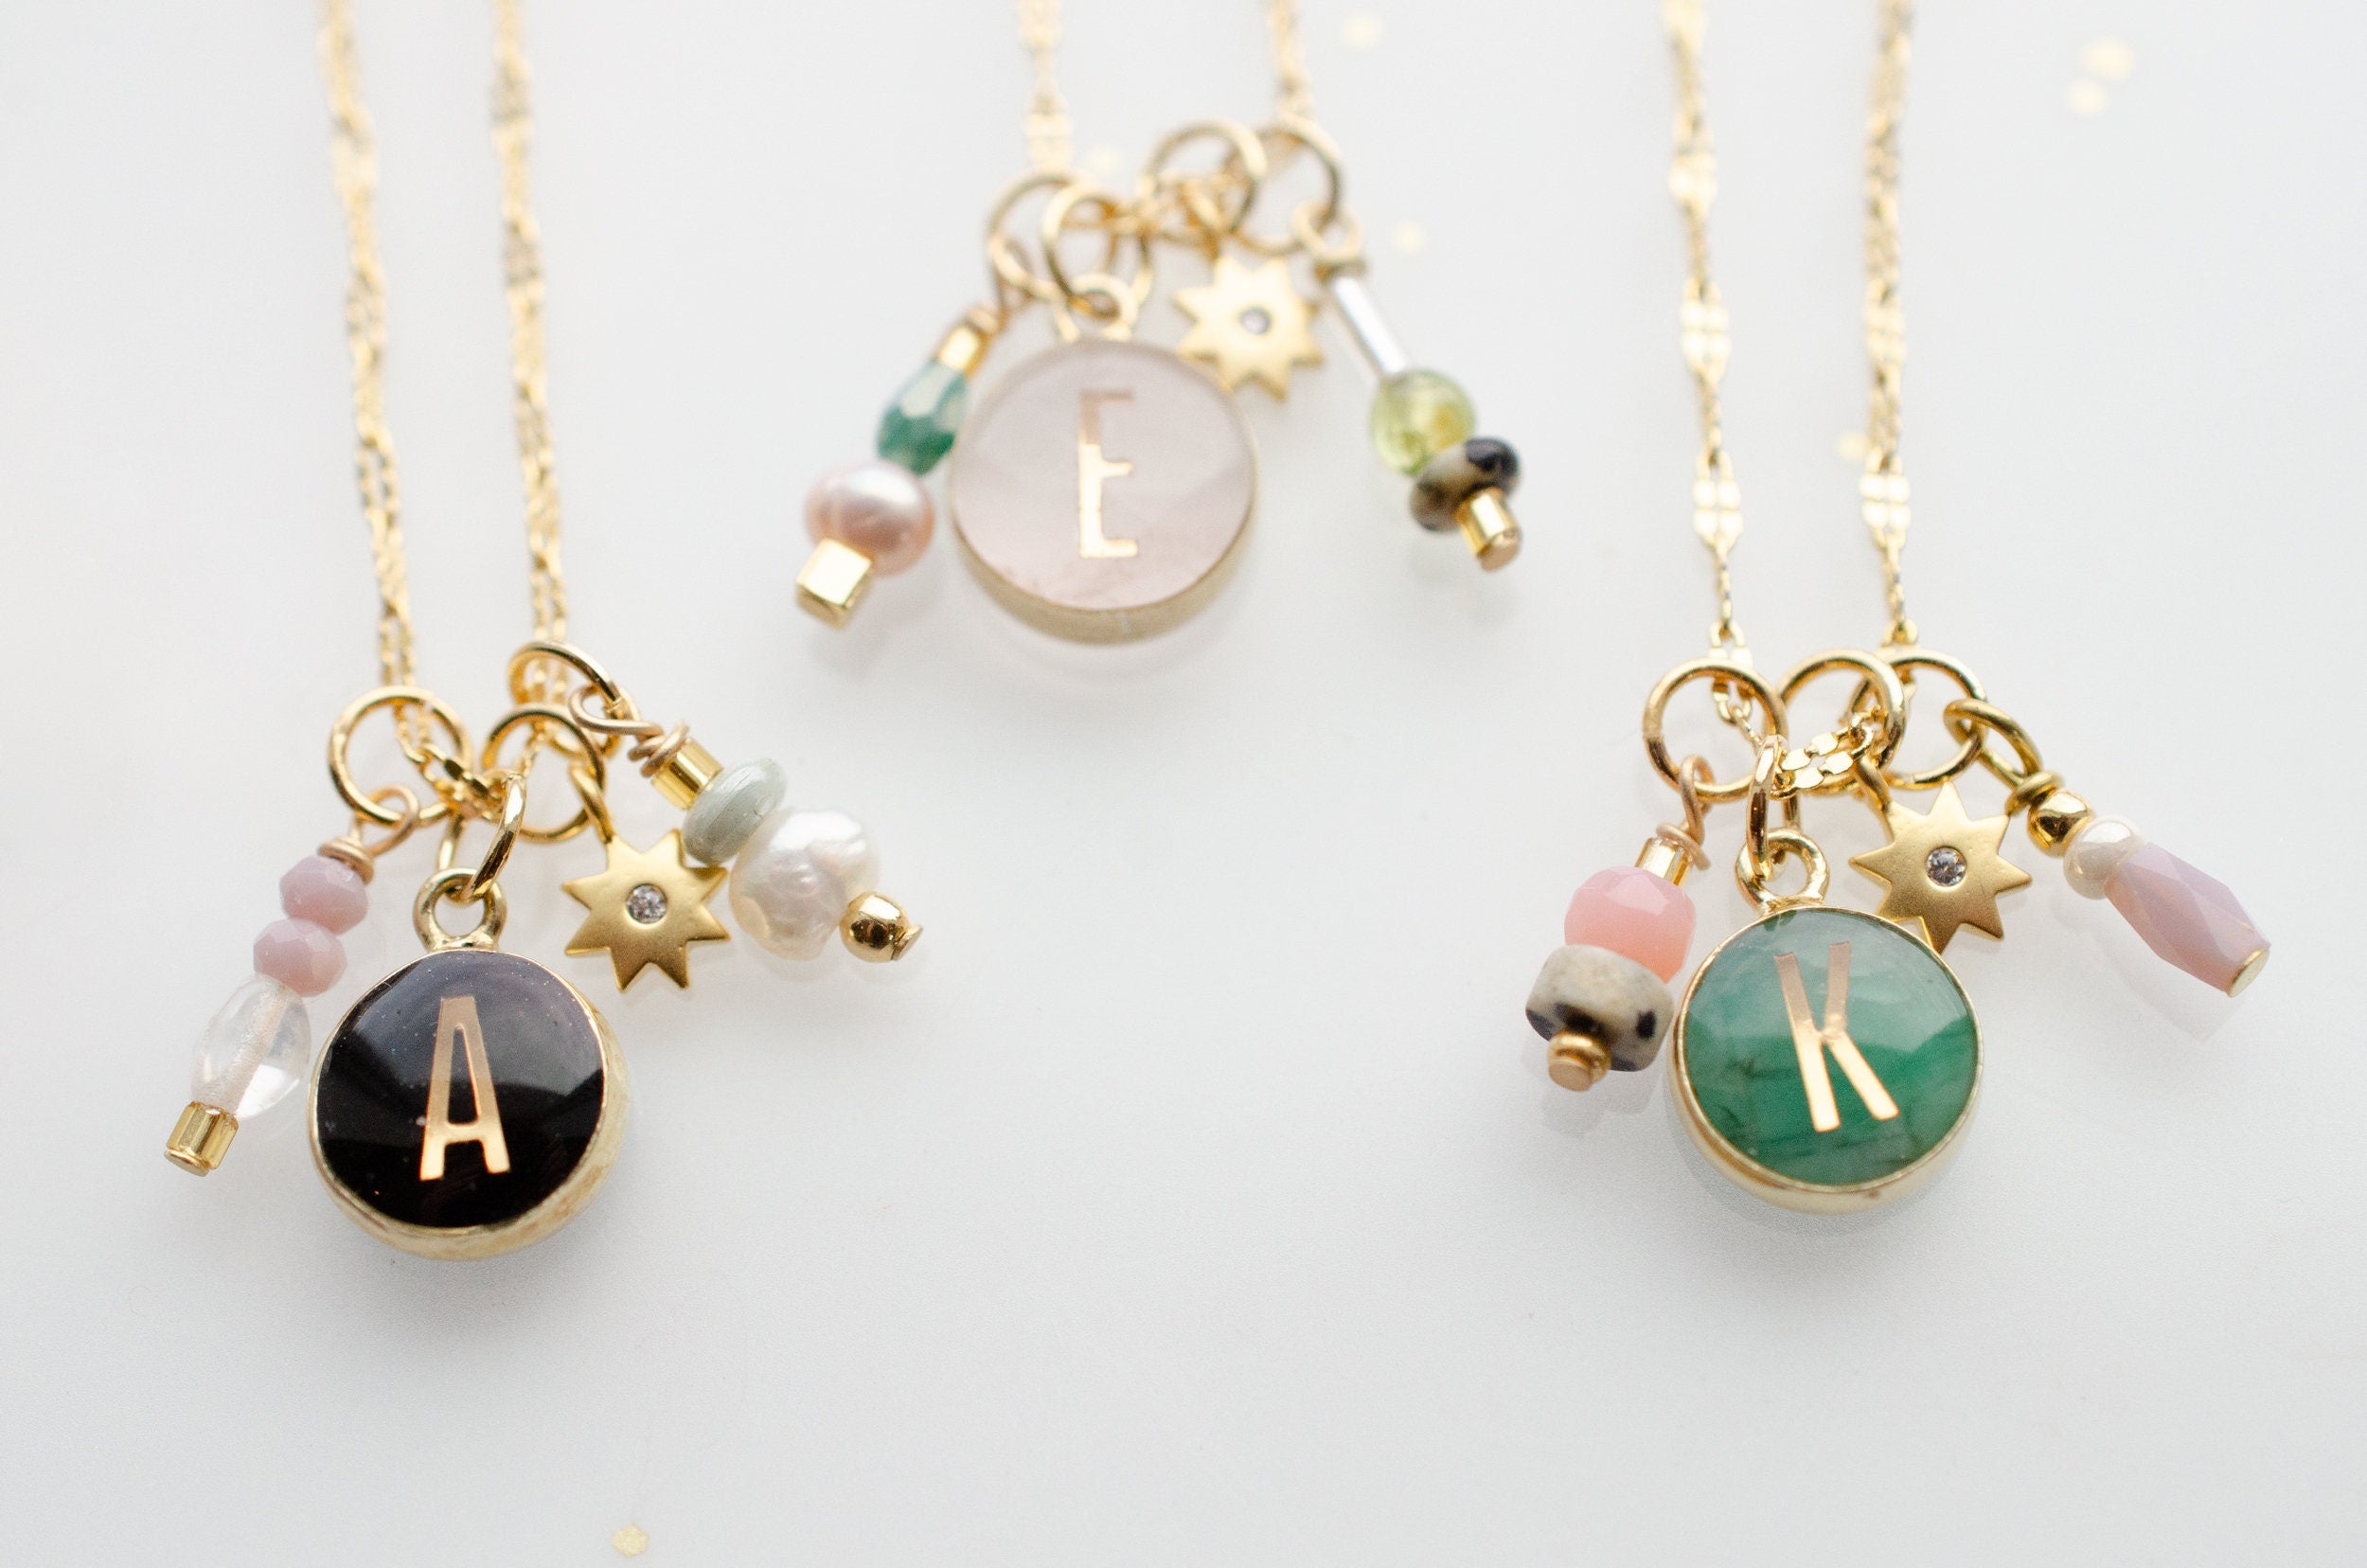 Monogram Charm Necklace Initial Letter Necklace Personalized 